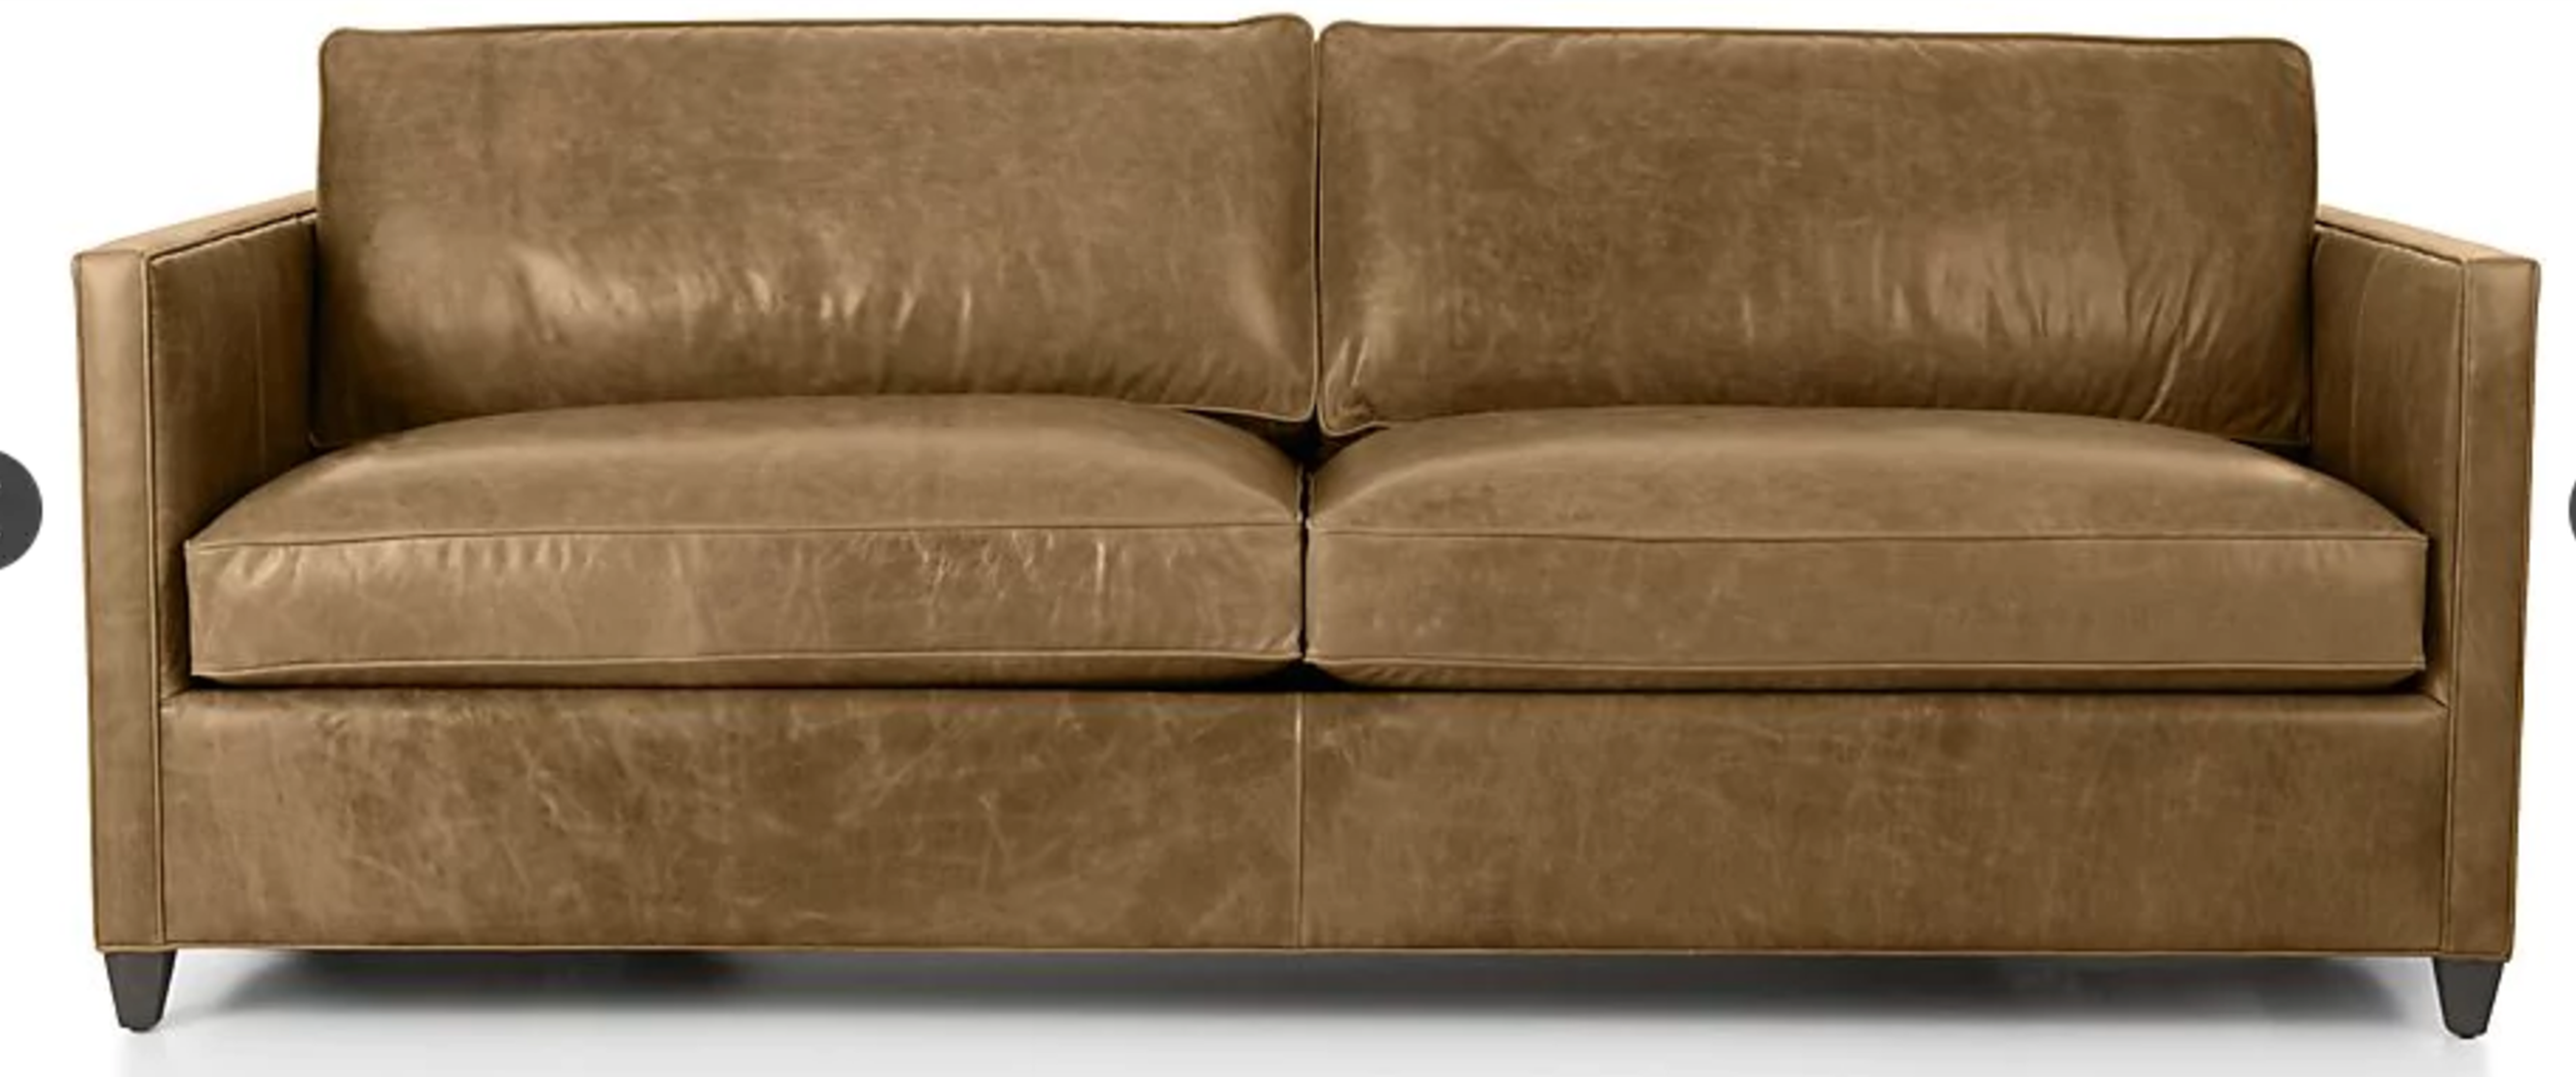 Dryden Leather Sofa - Crate and Barrel